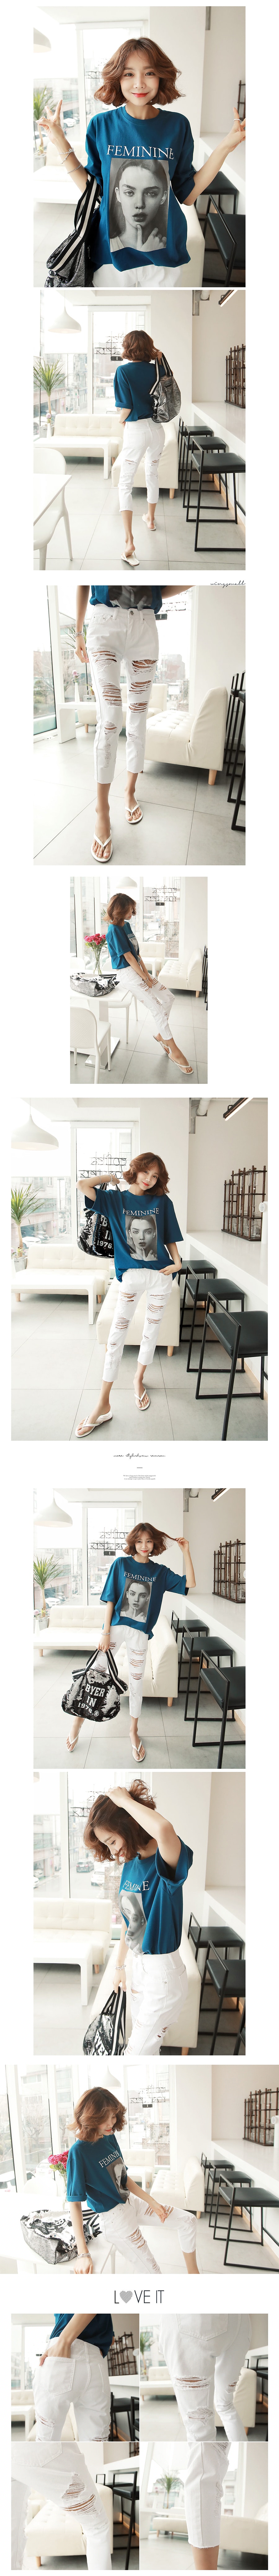 KOREA Distressed Cropped Jeans #White S(25-26) [Free Shipping]